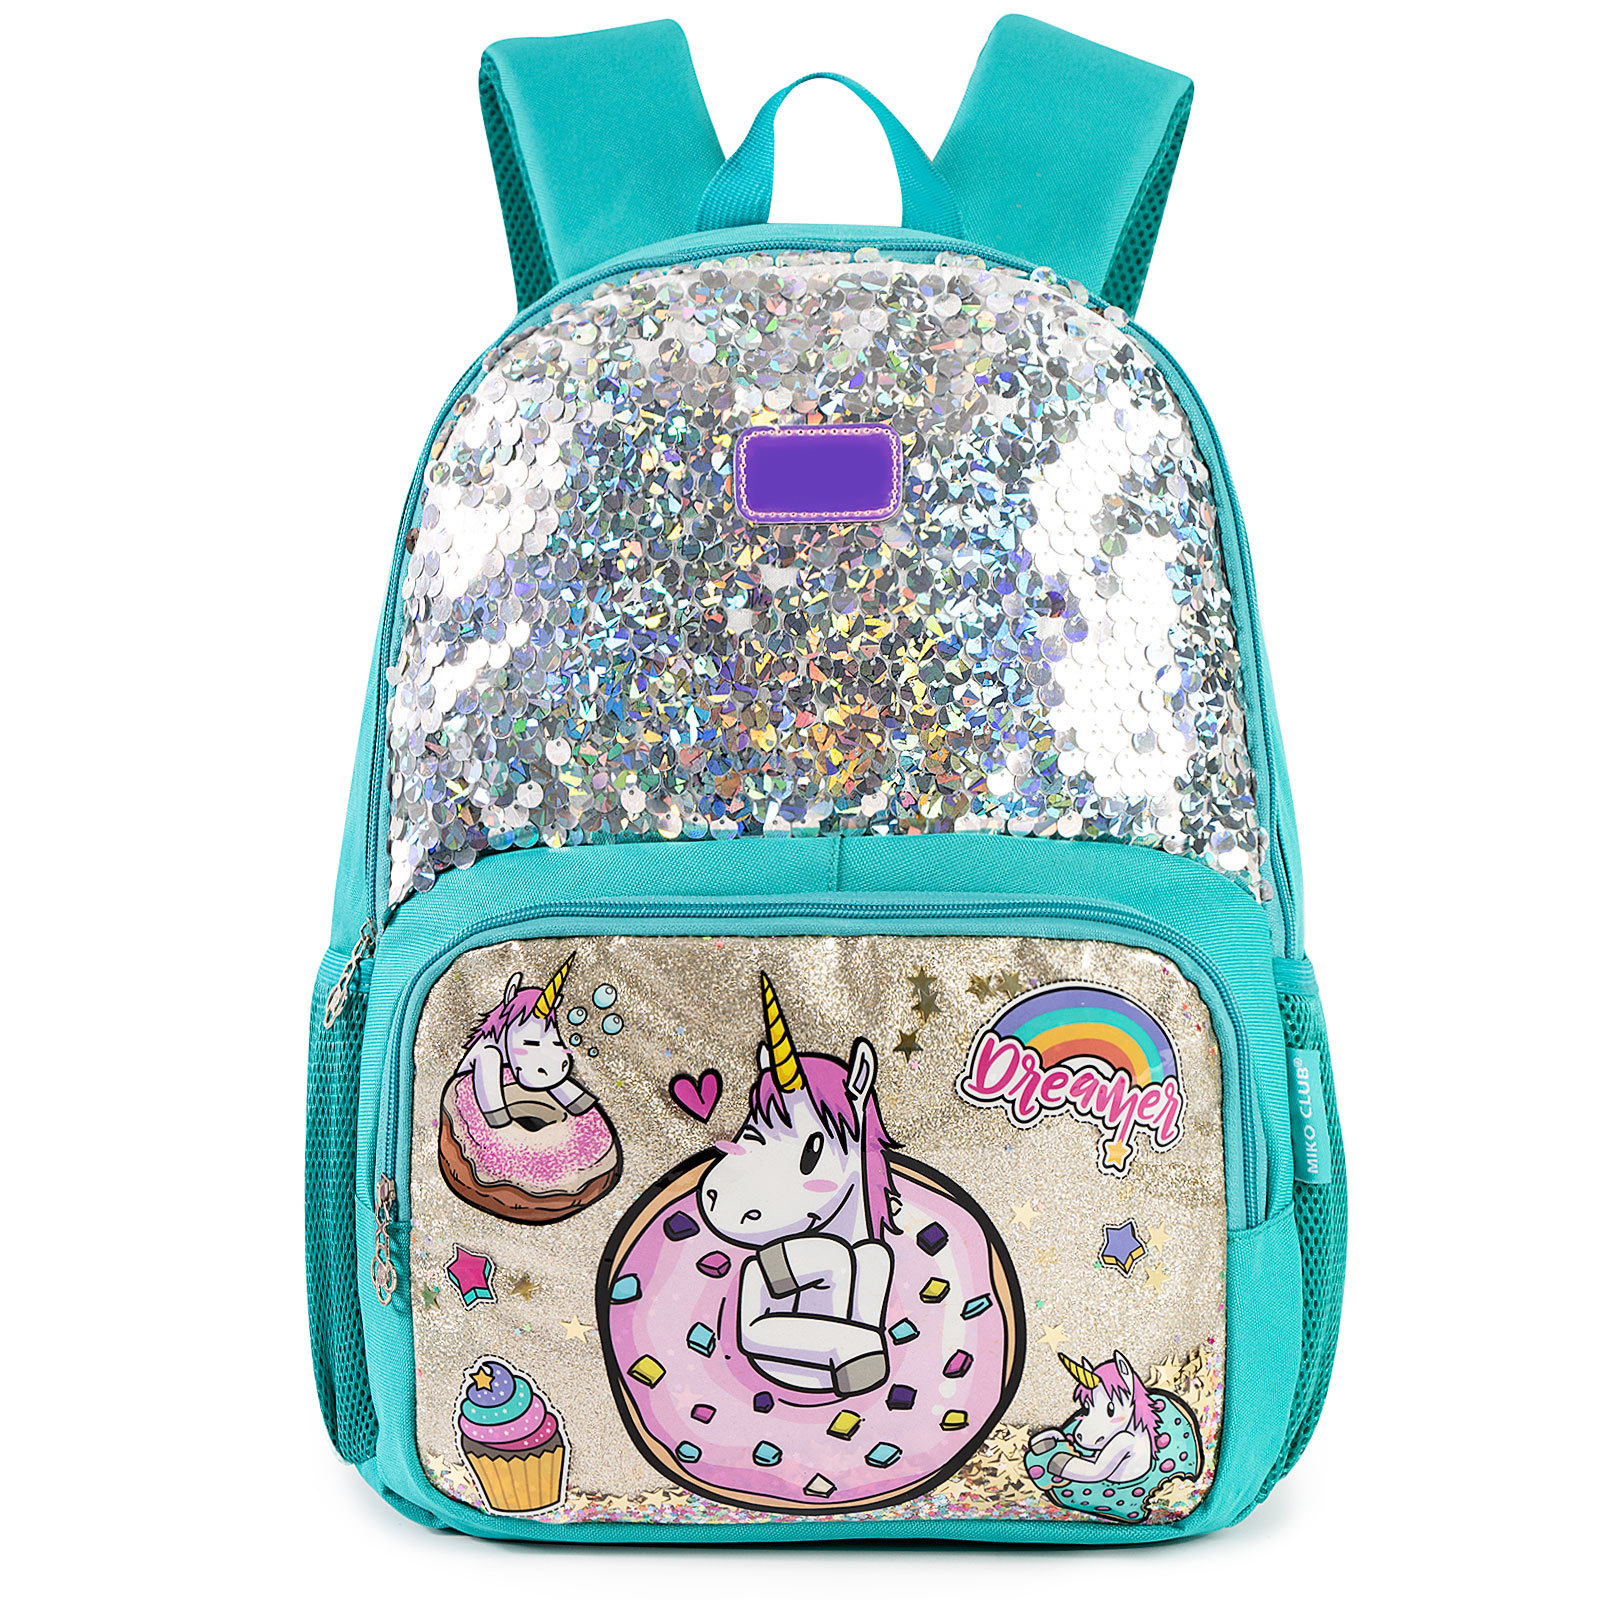 High-Quality Sequin Children Unicorn School Bags with Pencil Cases Set